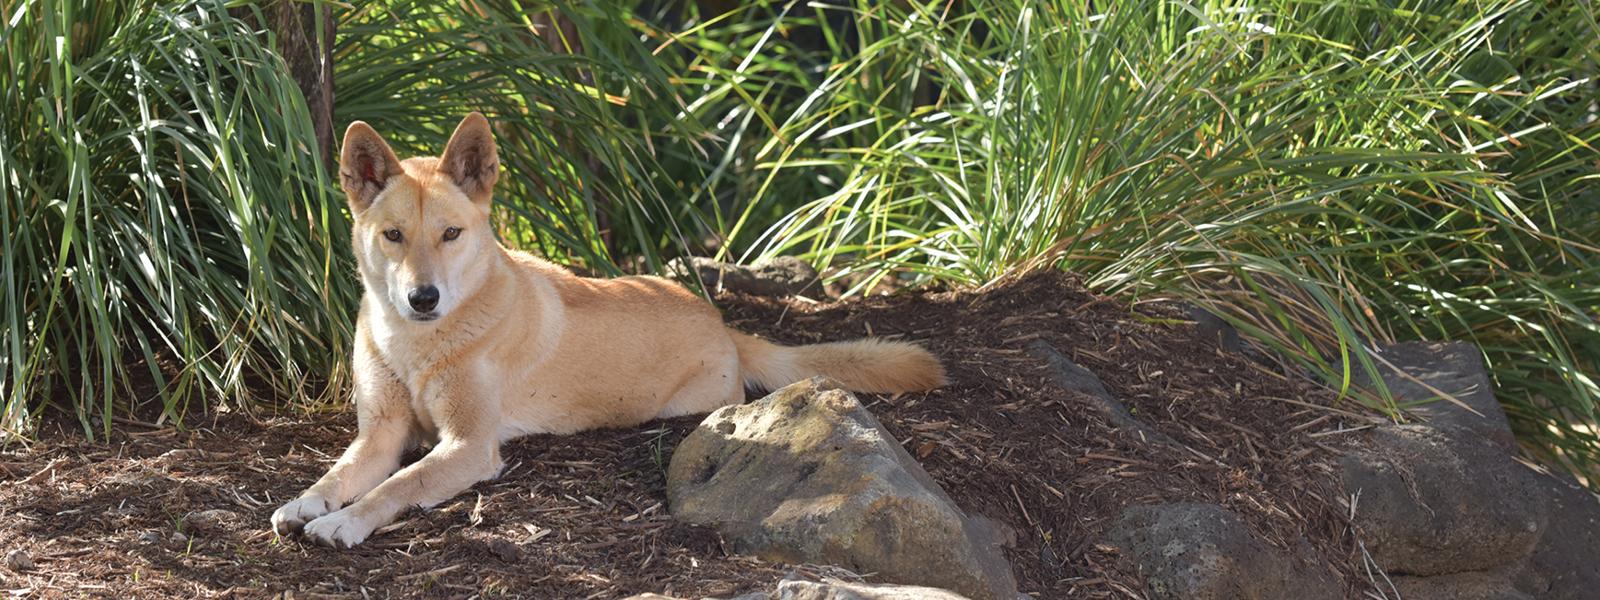 Dingo sitting on a rock at the Zoo